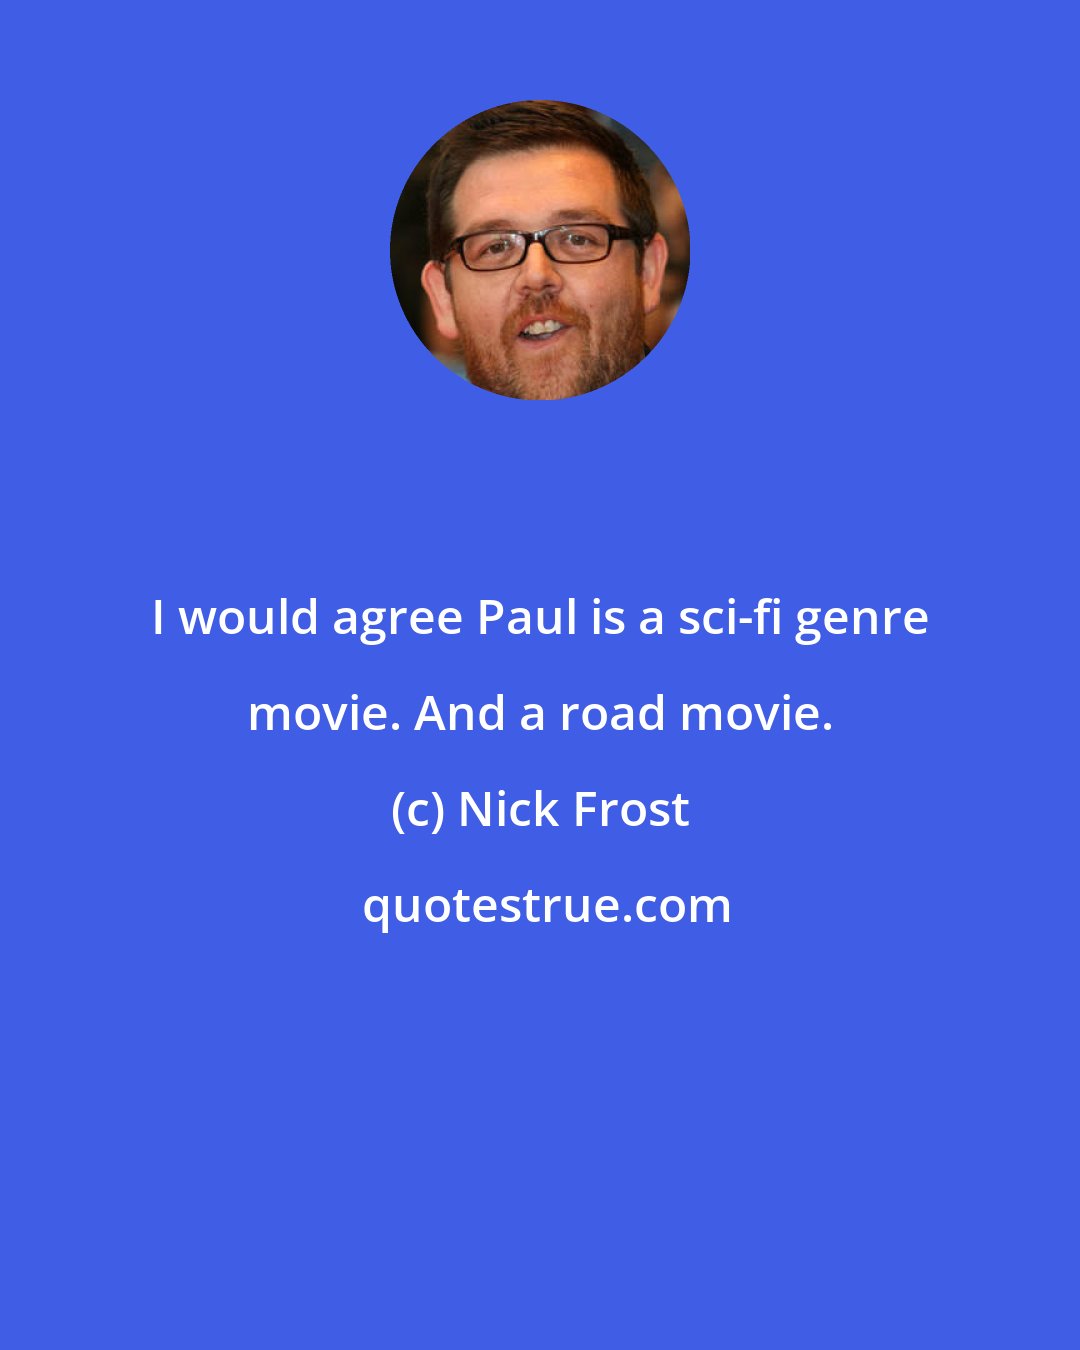 Nick Frost: I would agree Paul is a sci-fi genre movie. And a road movie.